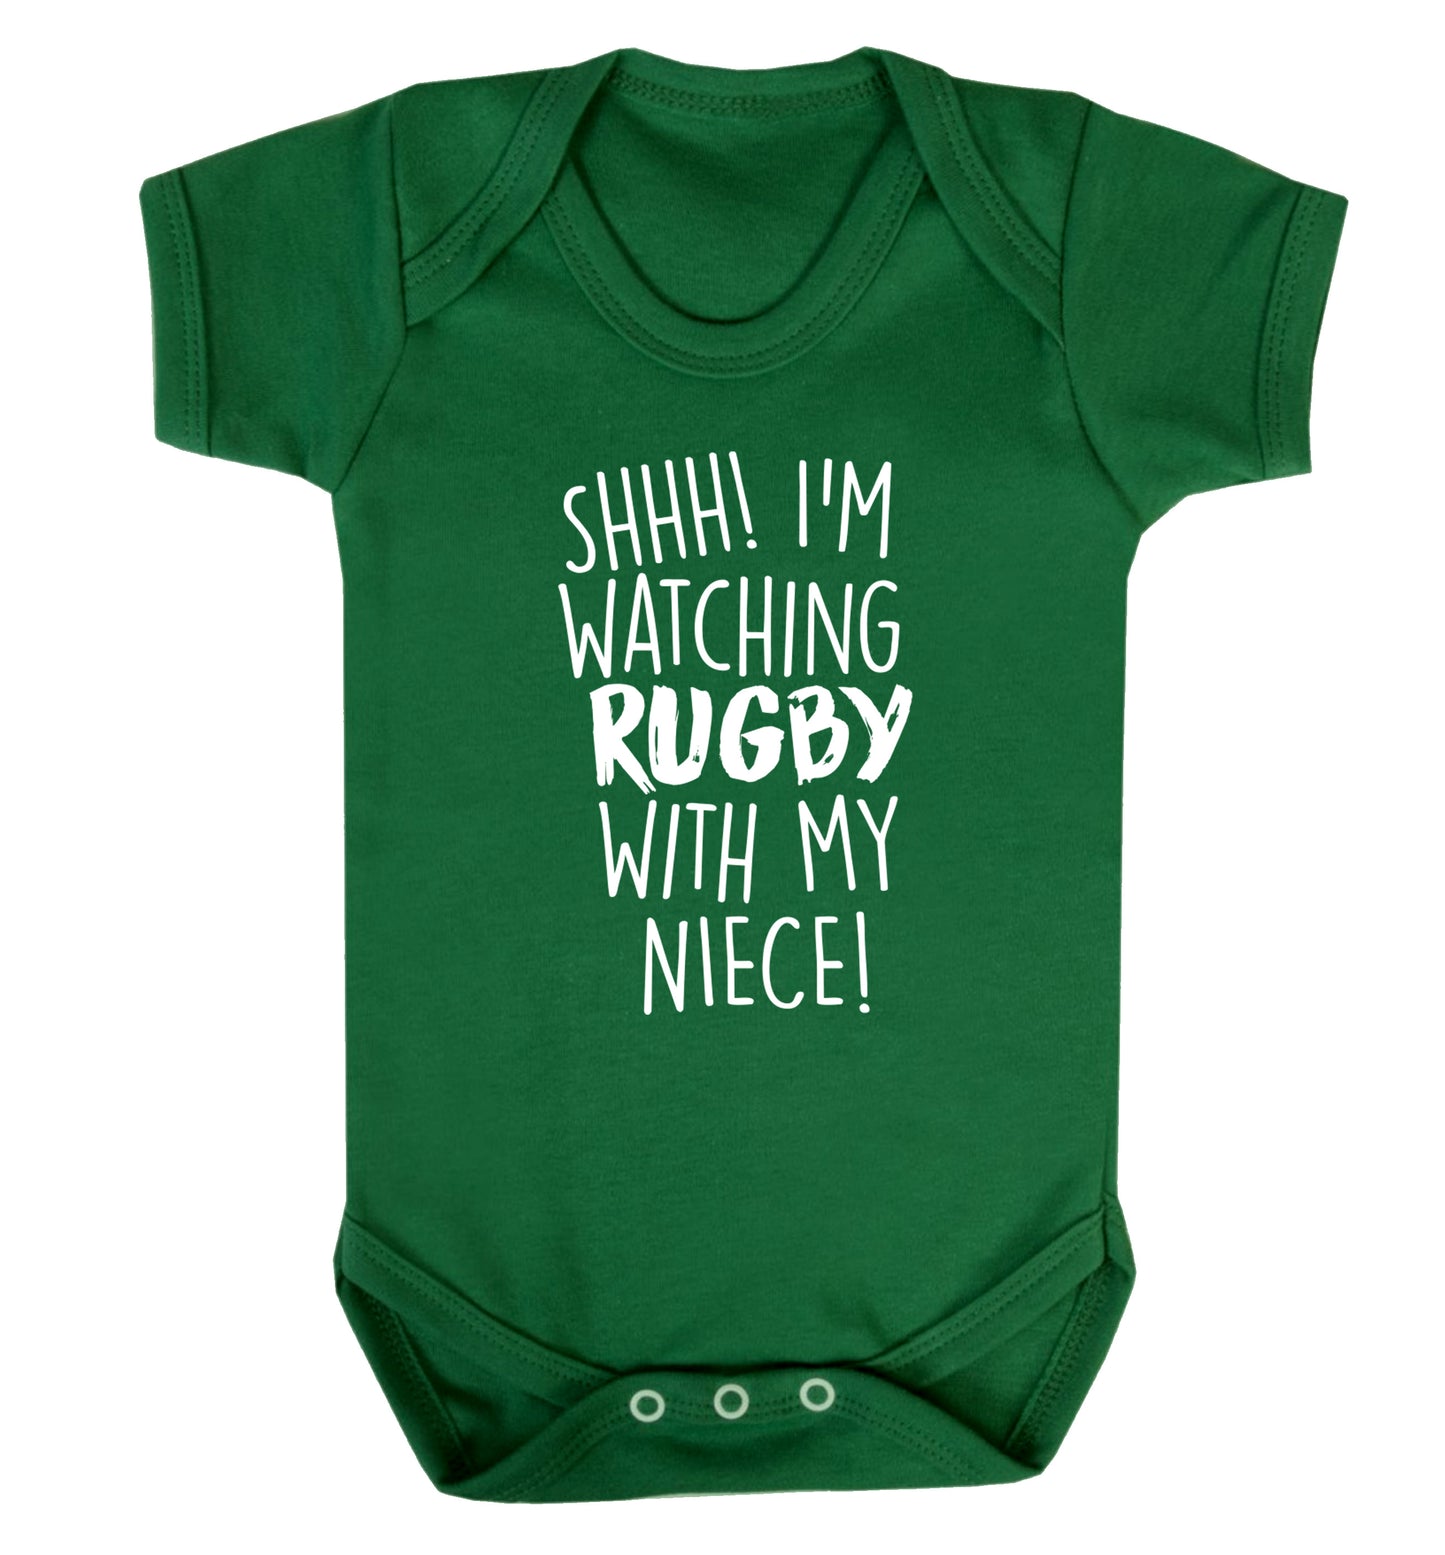 Shh.. I'm watching rugby with my niece Baby Vest green 18-24 months